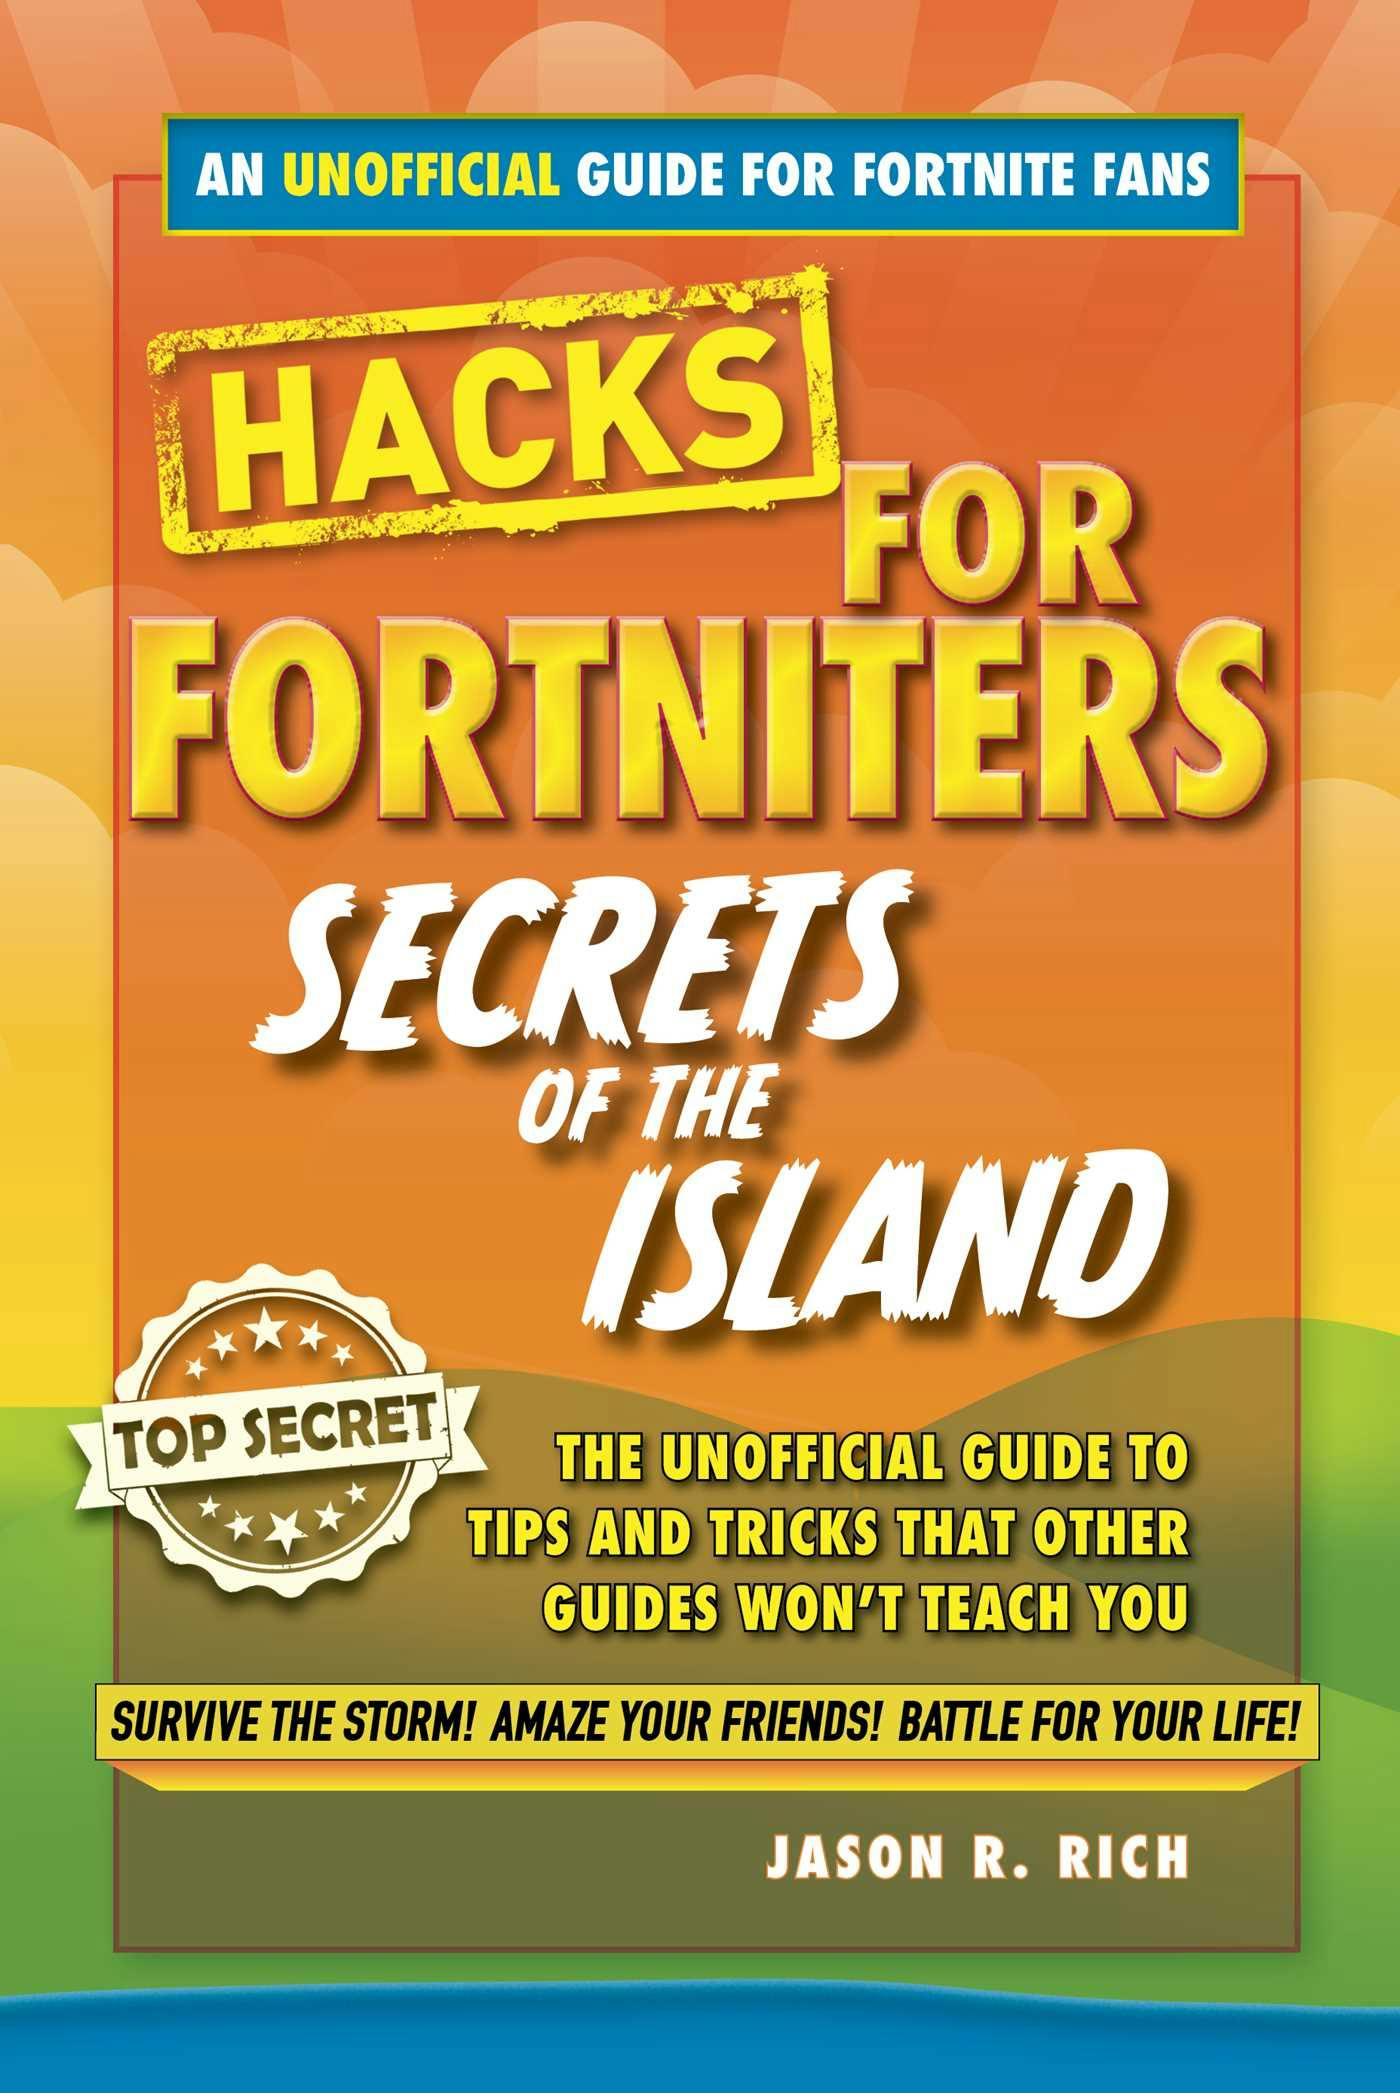 Hacks for Fortniters: Secrets of the Island: An Unoffical Guide to Tips and Tricks That Other Guides Won't Teach You - Jason R. Rich